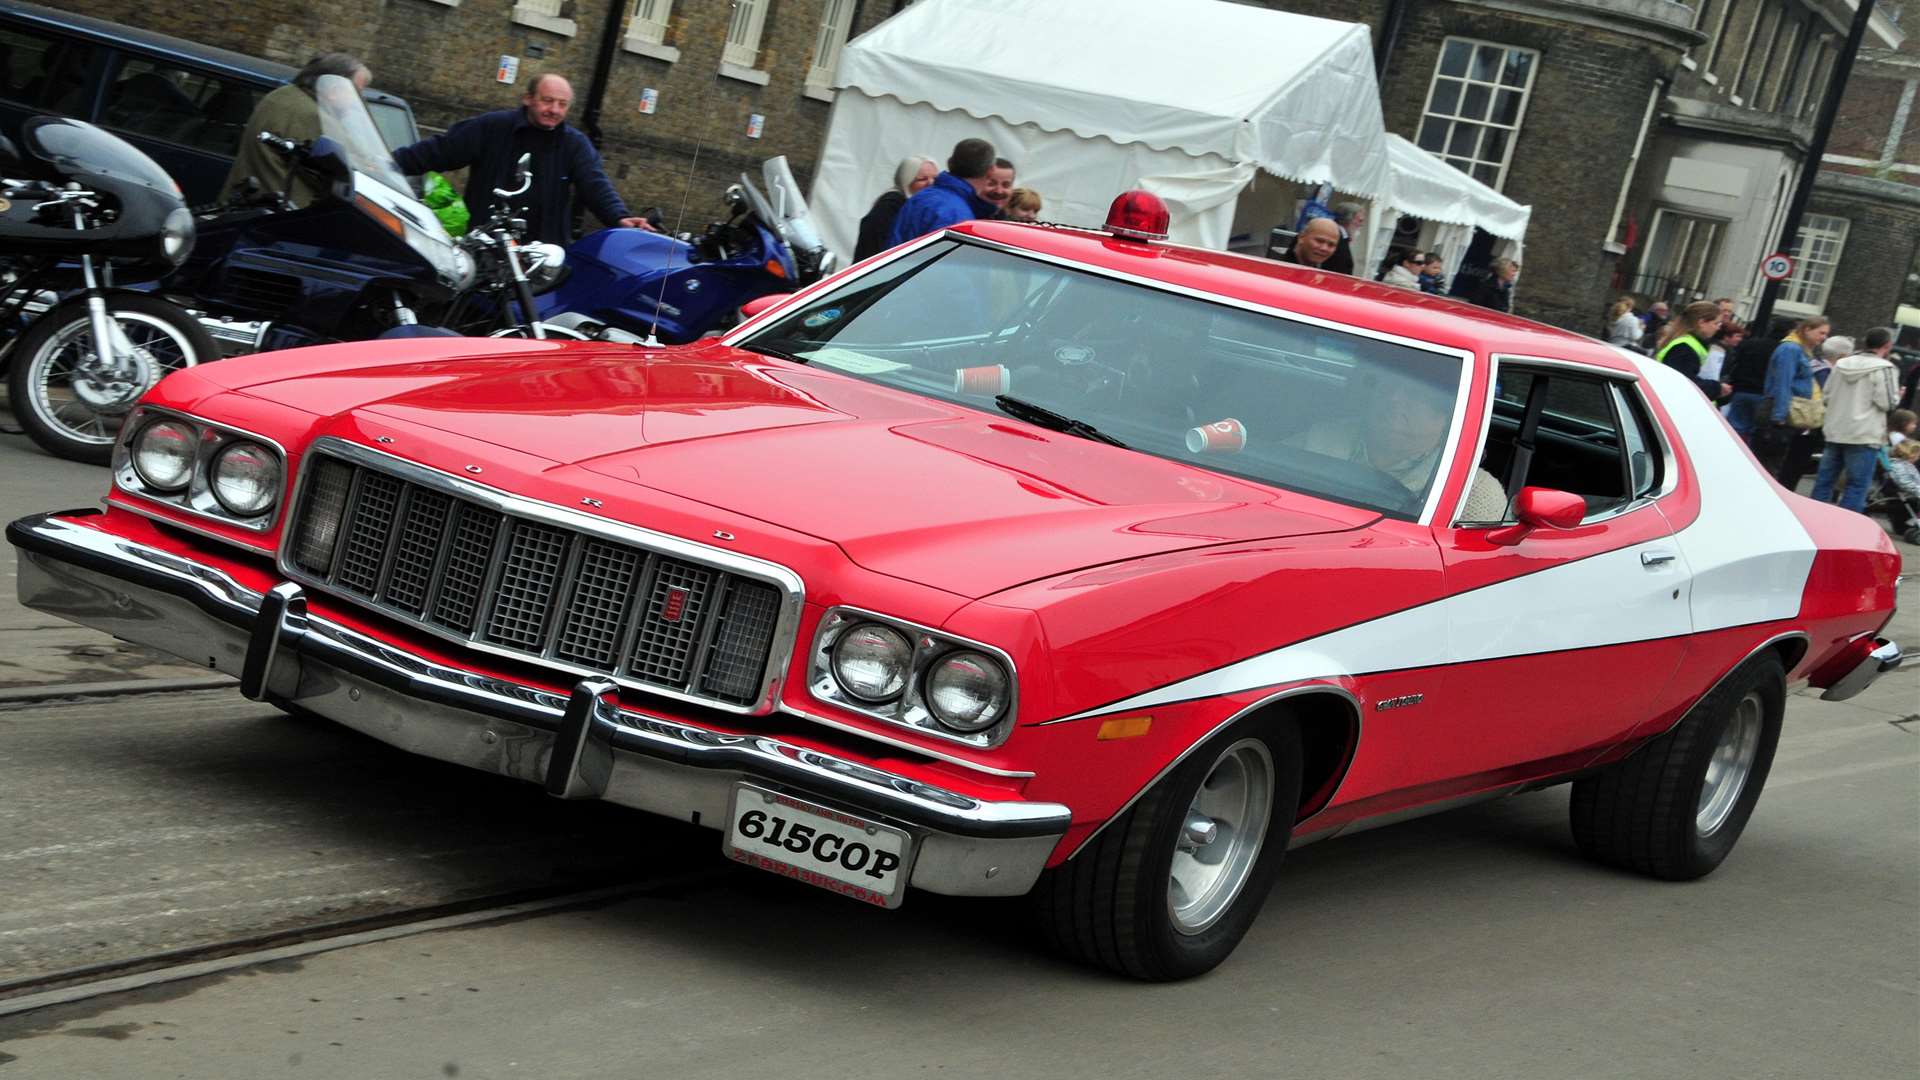 The Ford Gran Torino from Starsky & Hutch